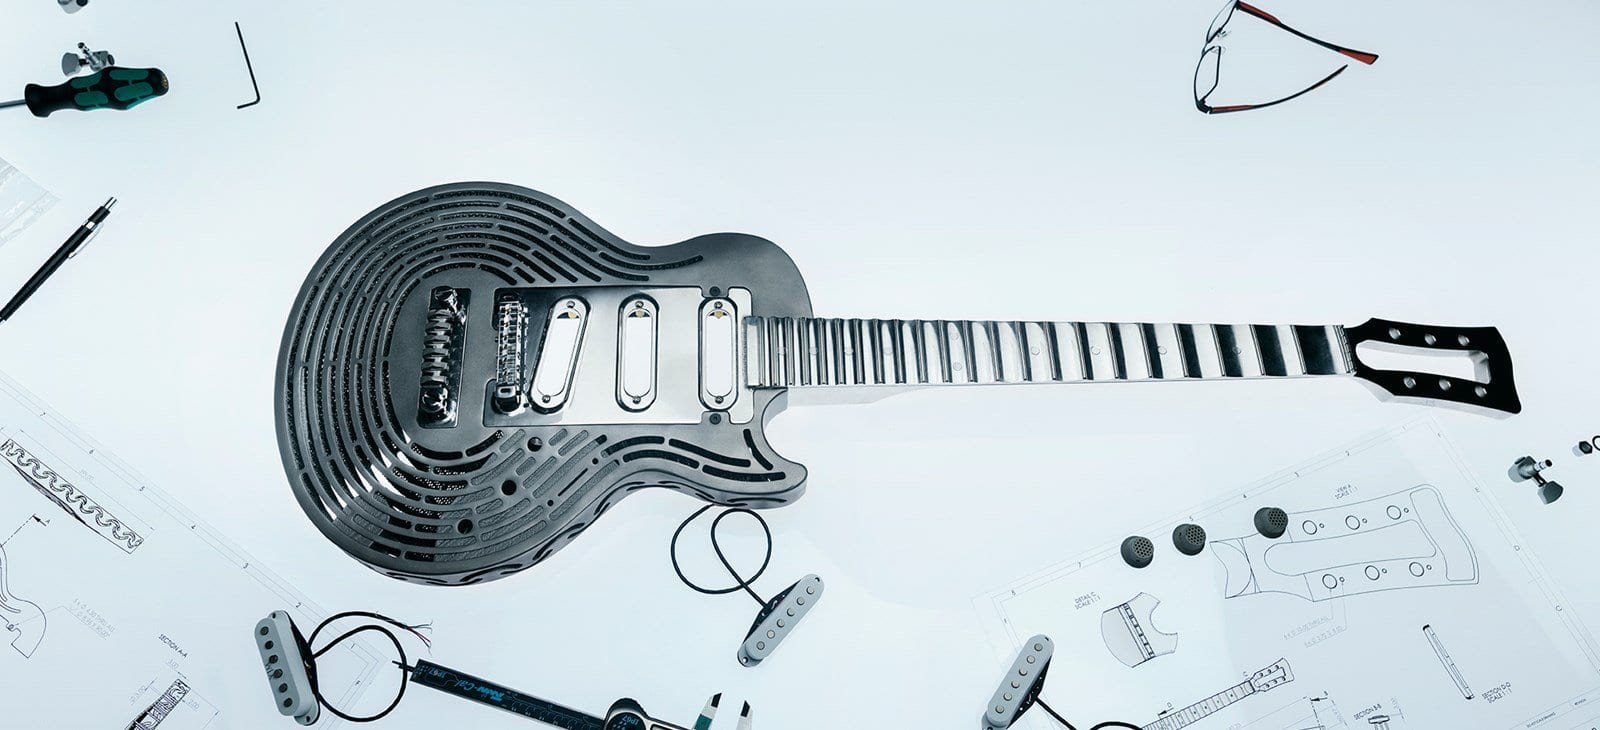 Sandvik has made the world’s first smash-proof guitar!